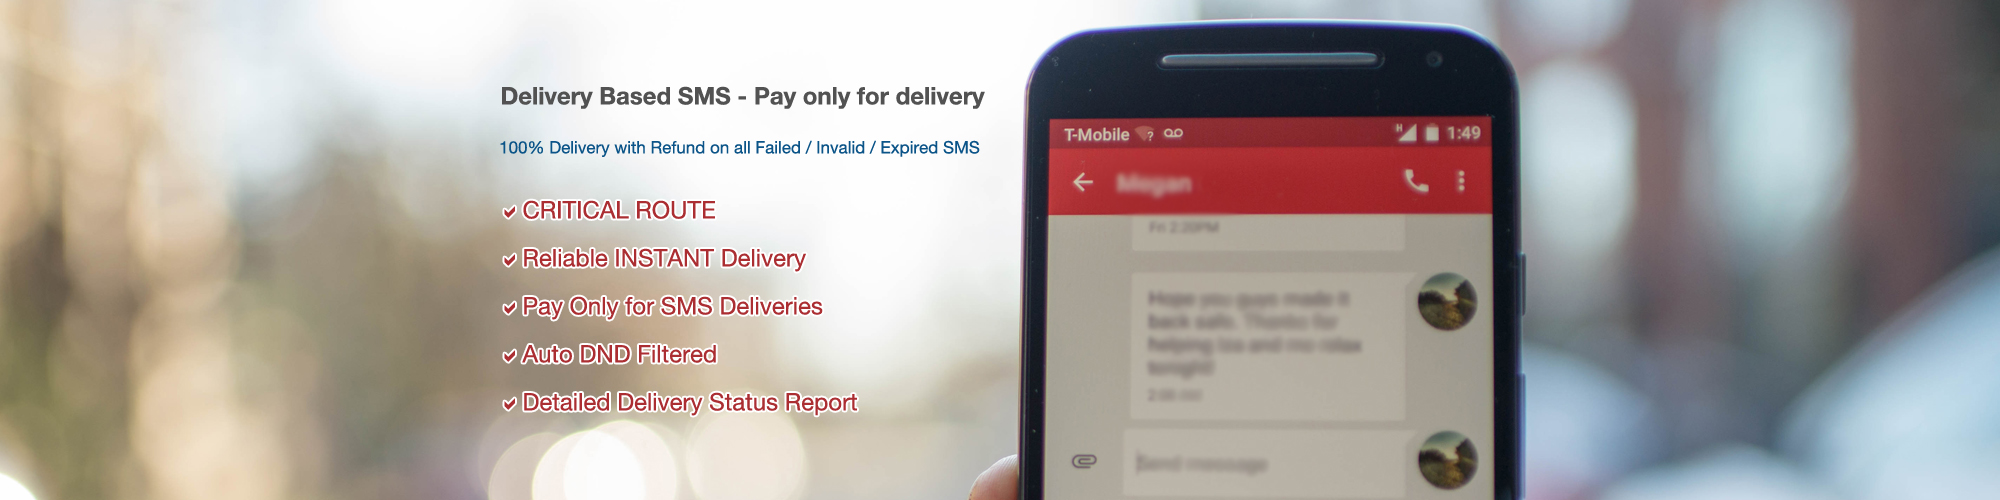 Delivery Based SMS